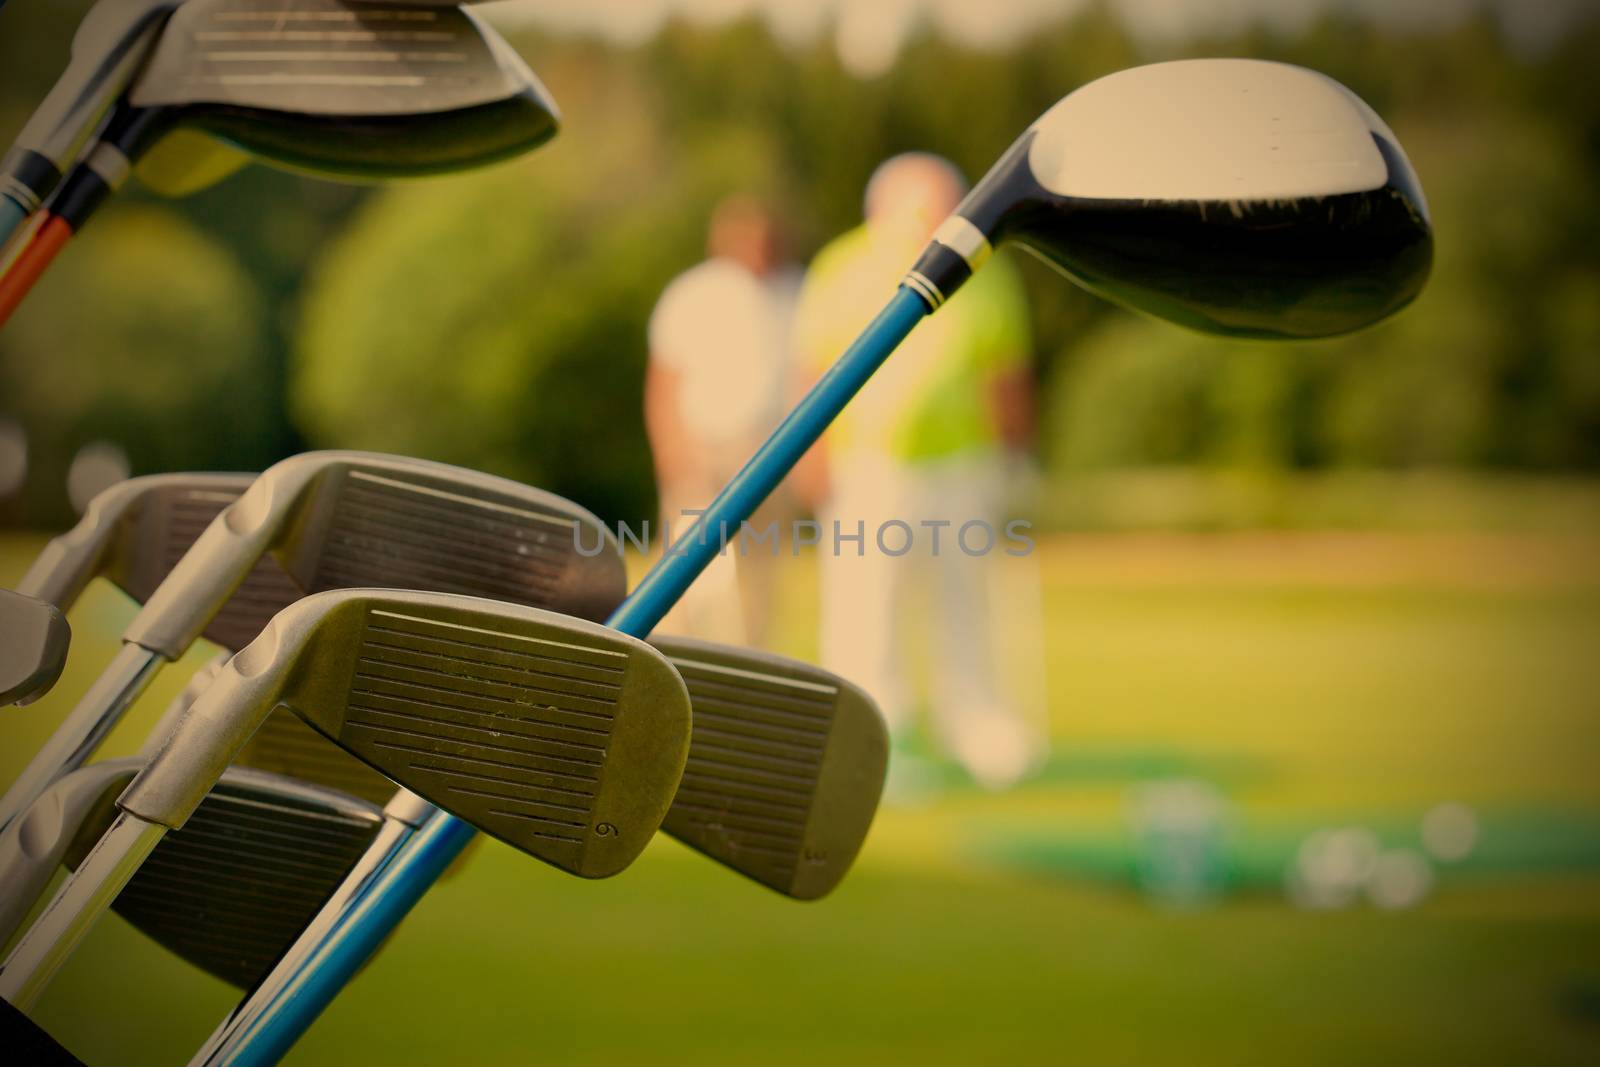 golf club against the background of green field, instagram image style